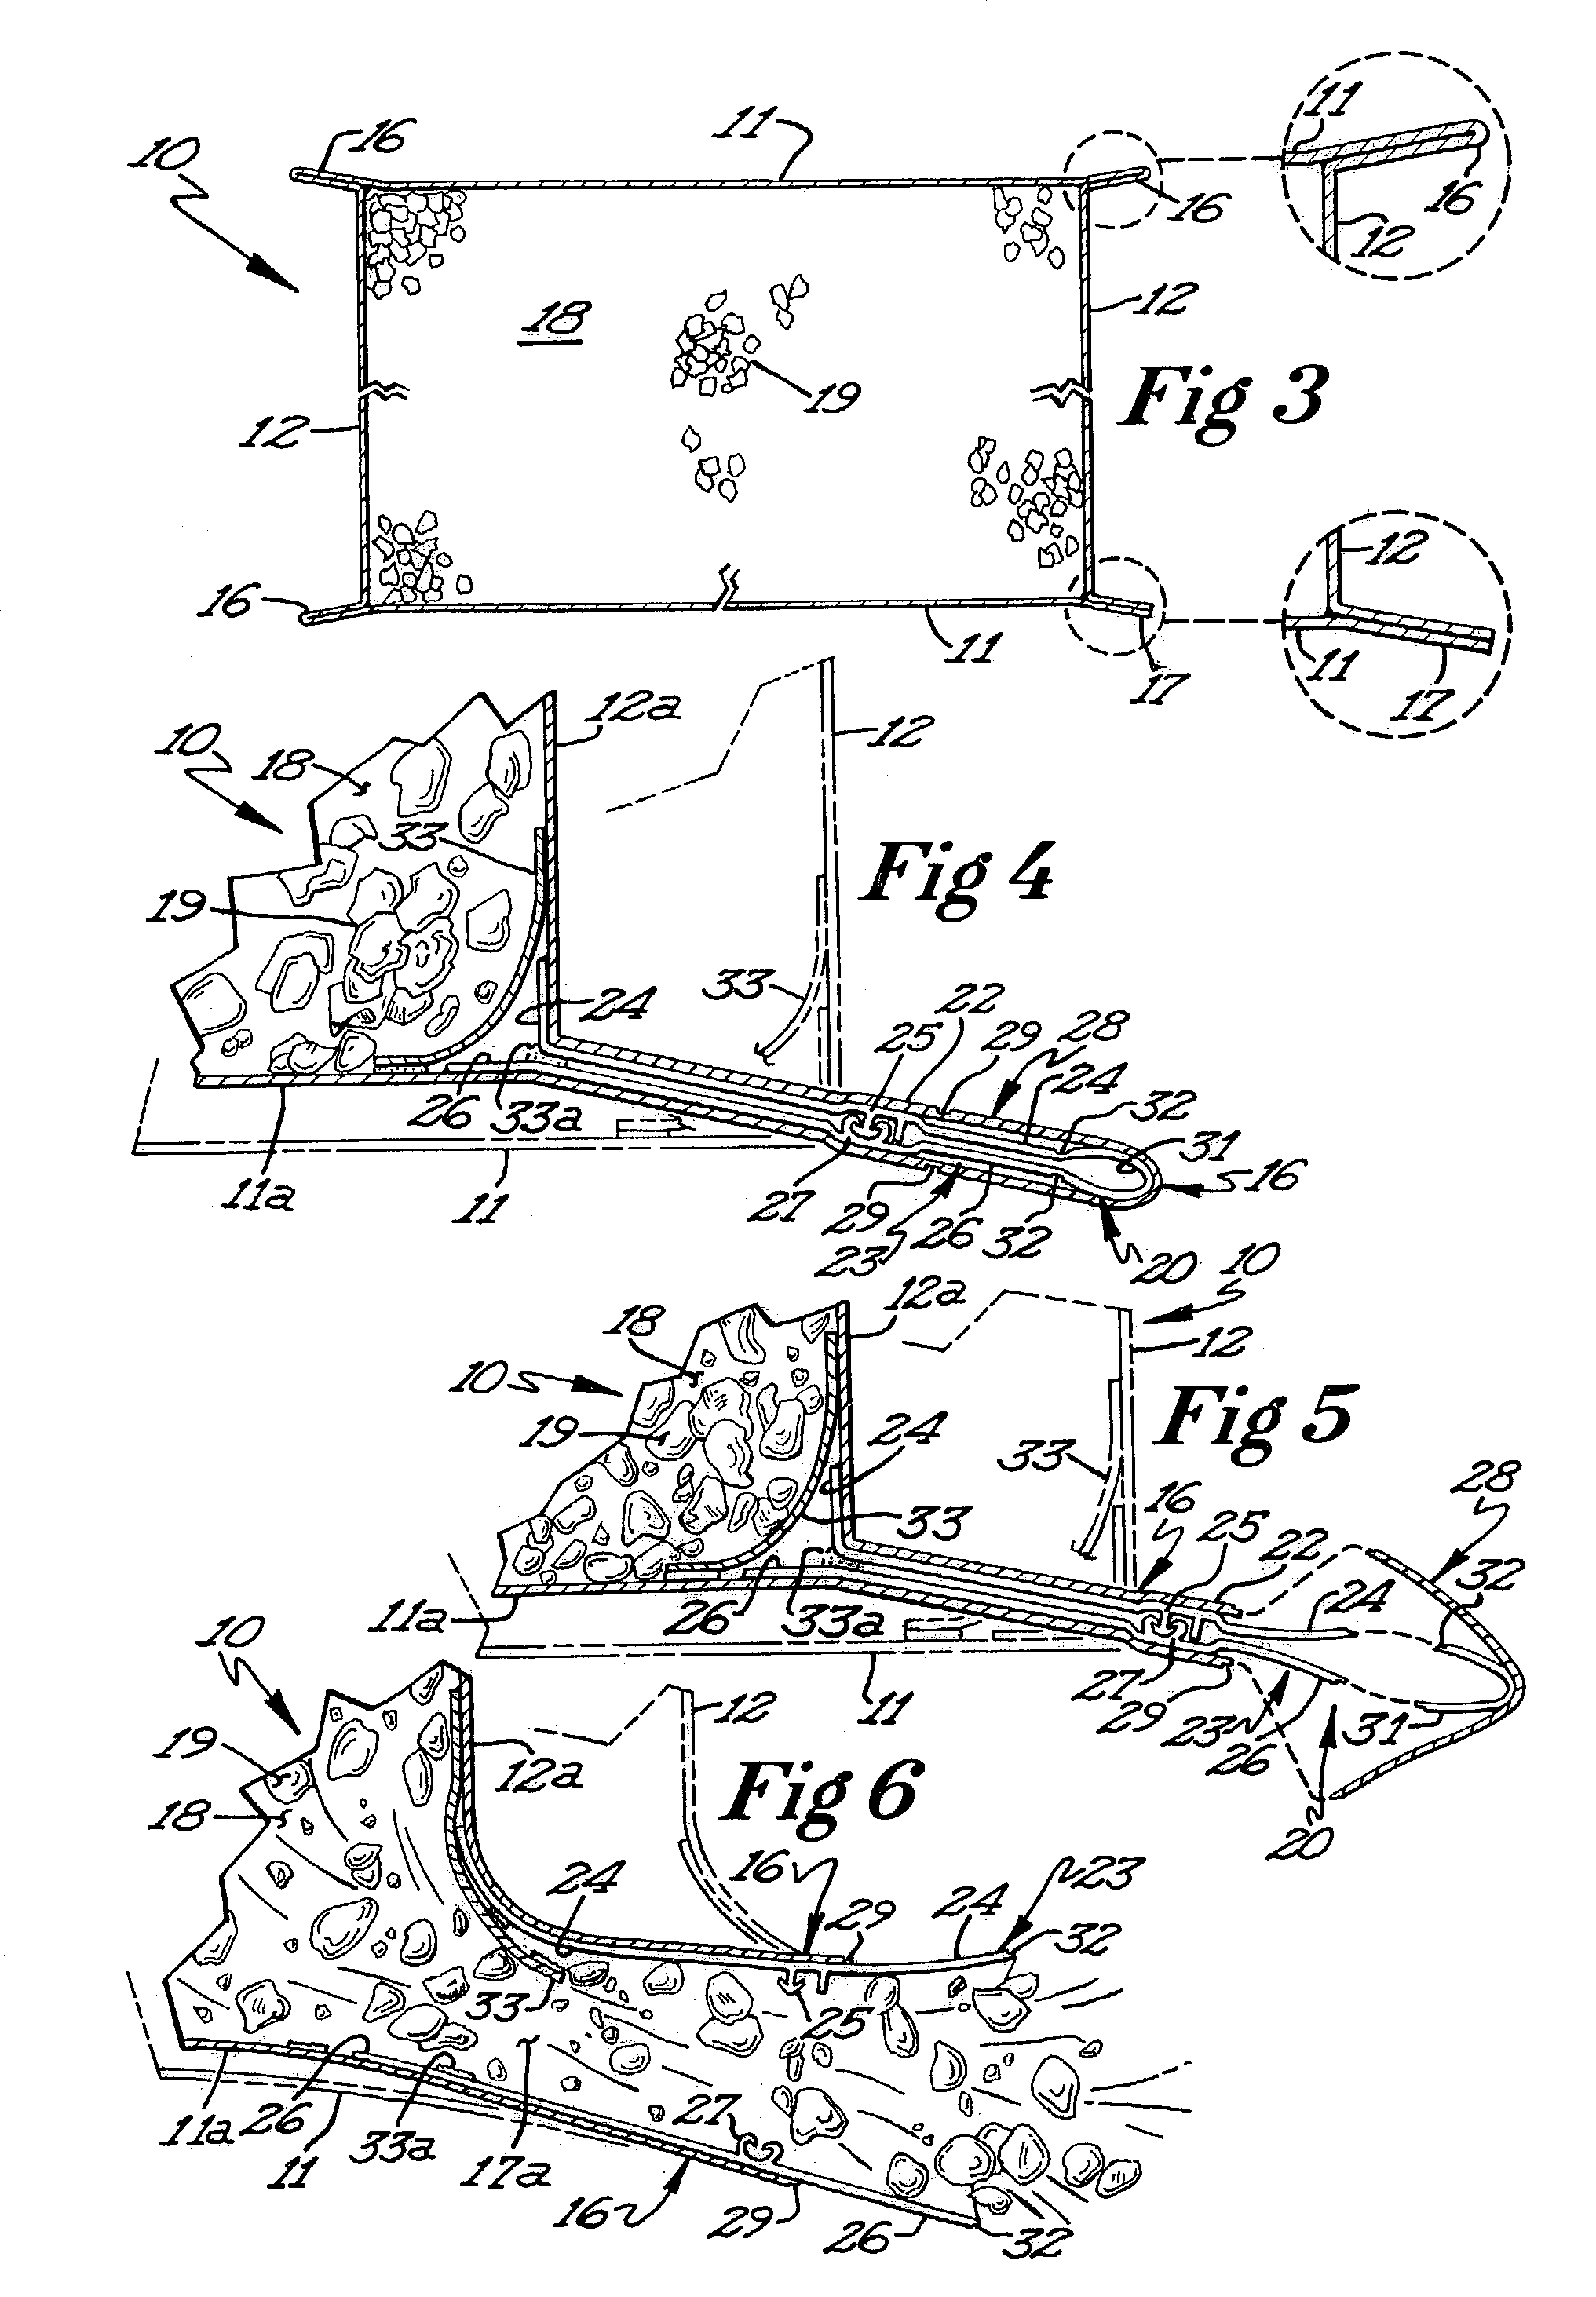 Paper and plastic bags flexible packages and other containers with re-closable device and method of making the same